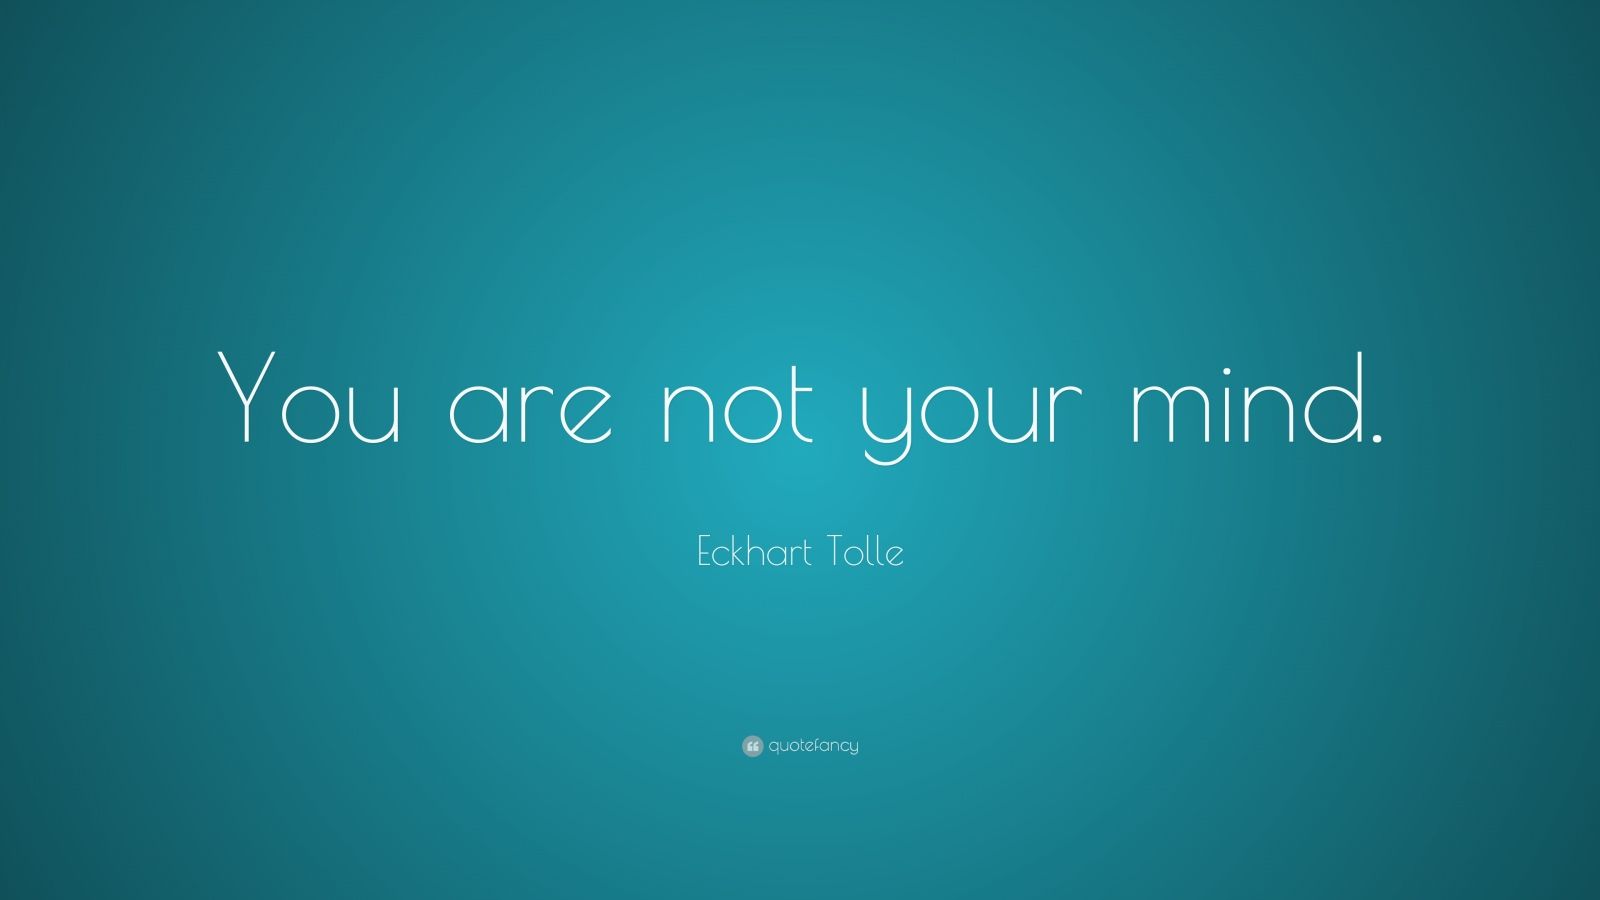 Eckhart Tolle Quote: “You are not your mind.”